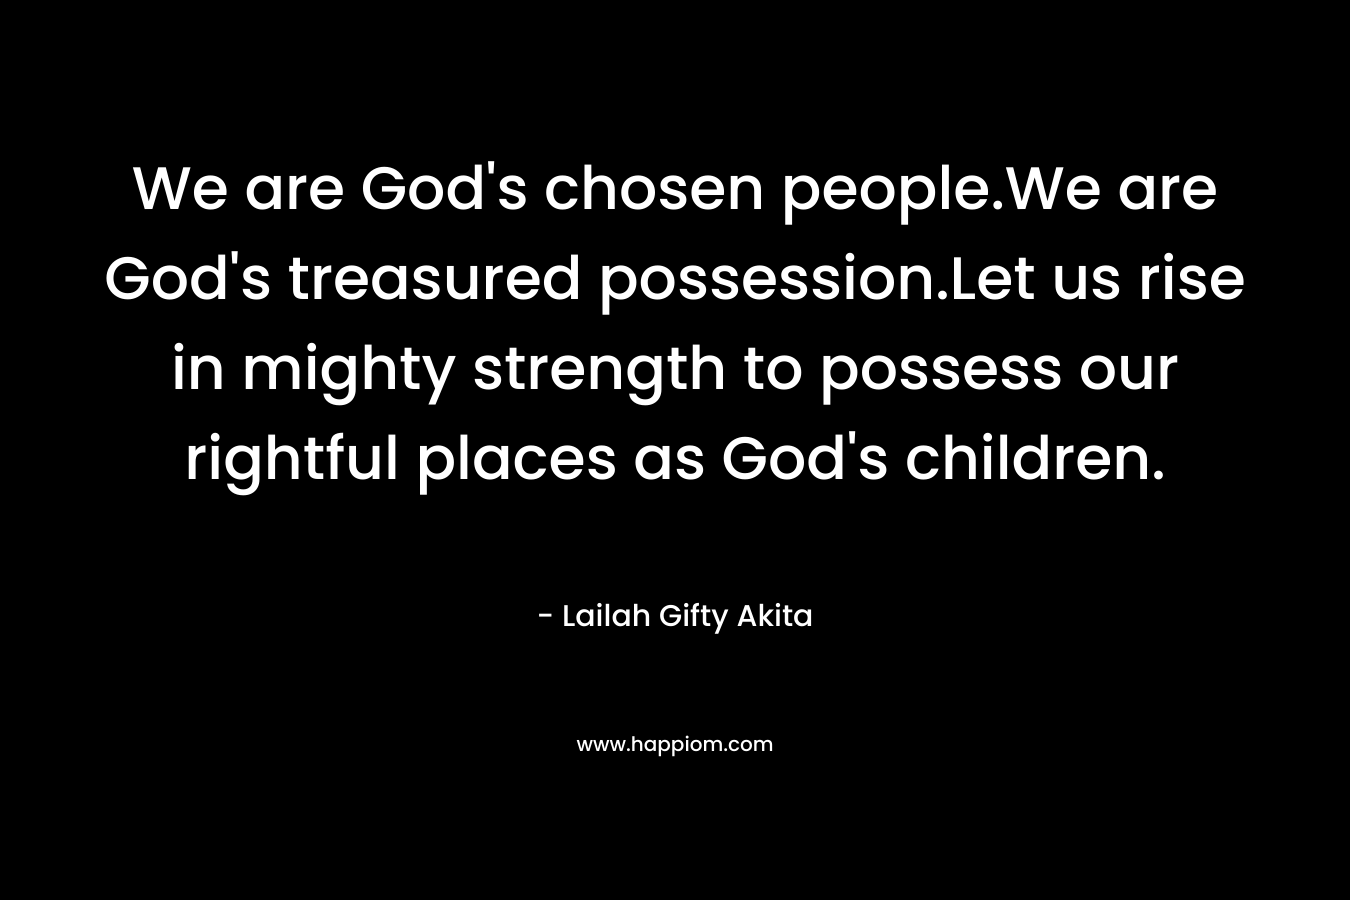 We are God's chosen people.We are God's treasured possession.Let us rise in mighty strength to possess our rightful places as God's children.